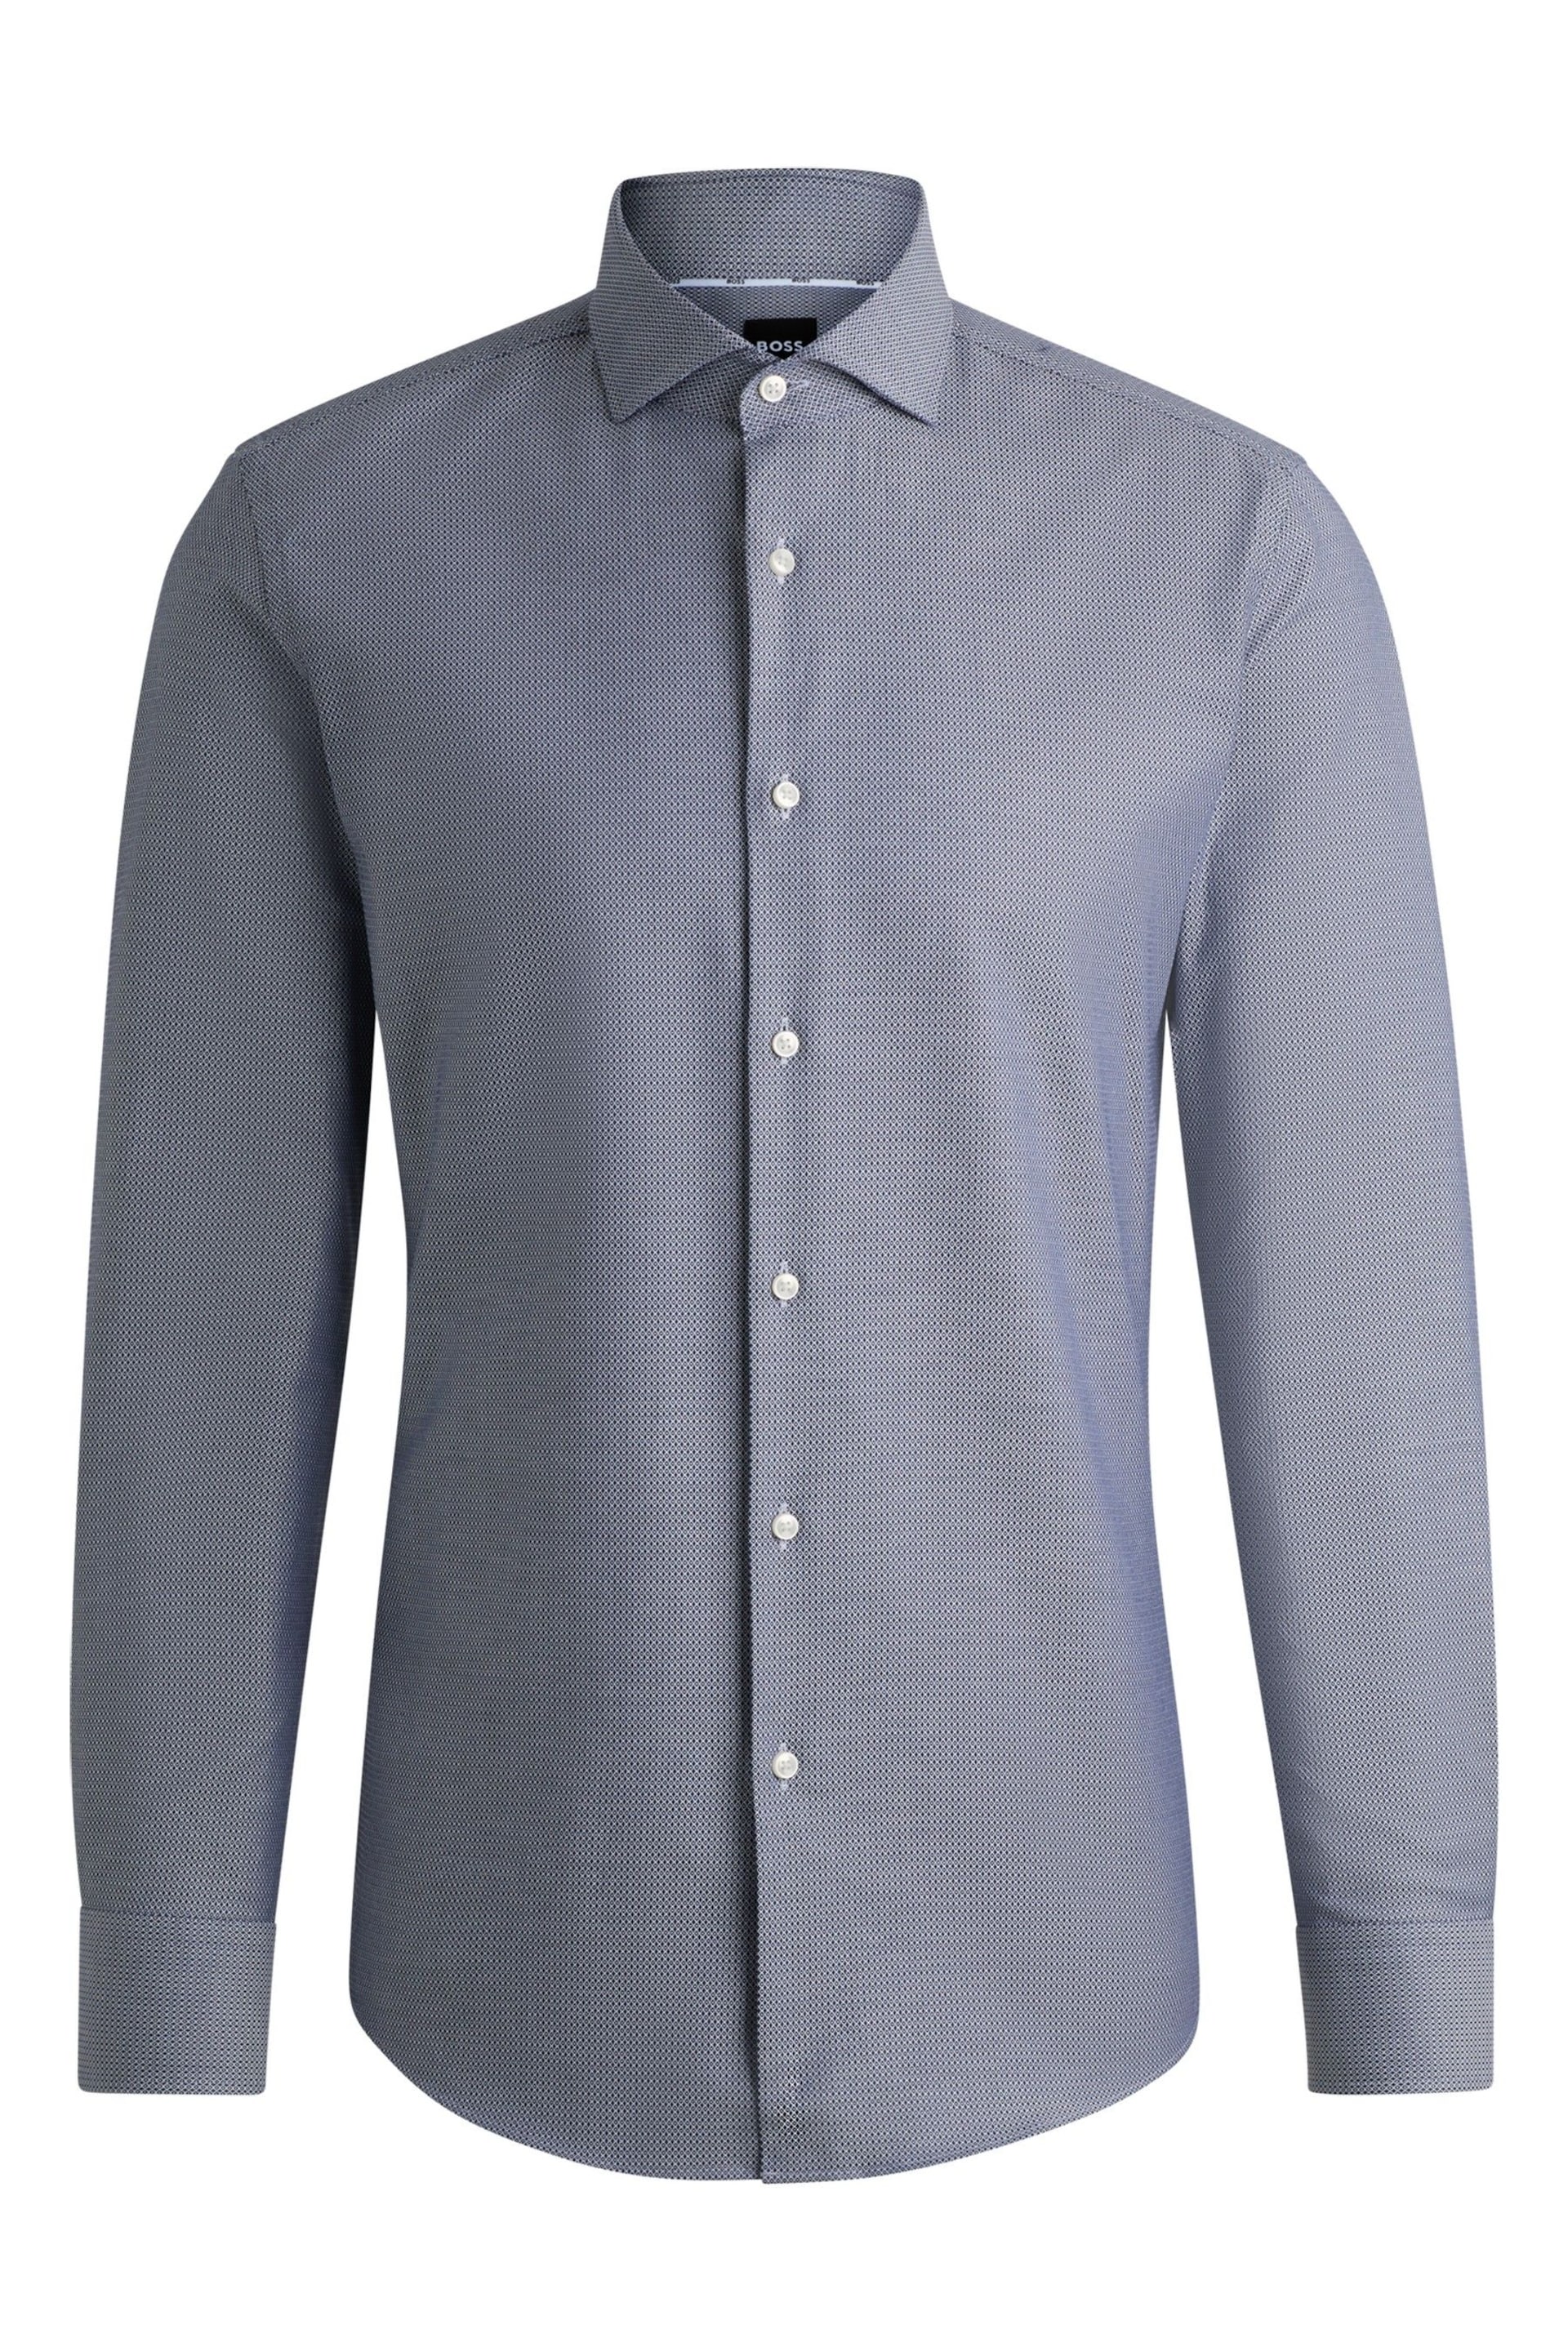 BOSS Blue Slim-Fit Shirt In Easy-Iron Structured Stretch Cotton - Image 6 of 6